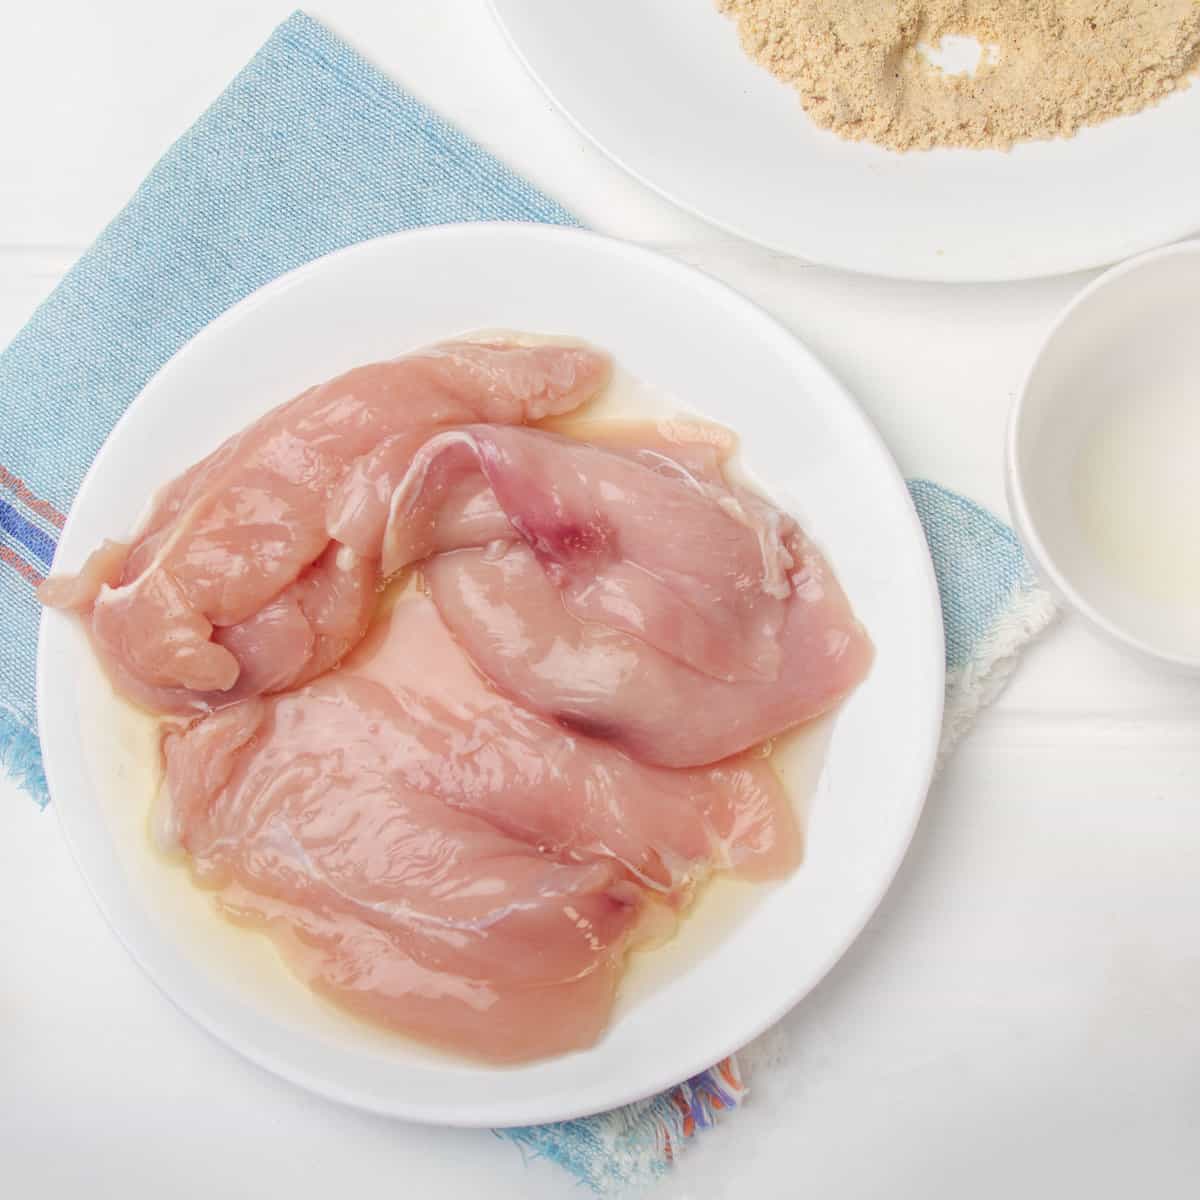 Raw chicken breasts coated in egg whites.